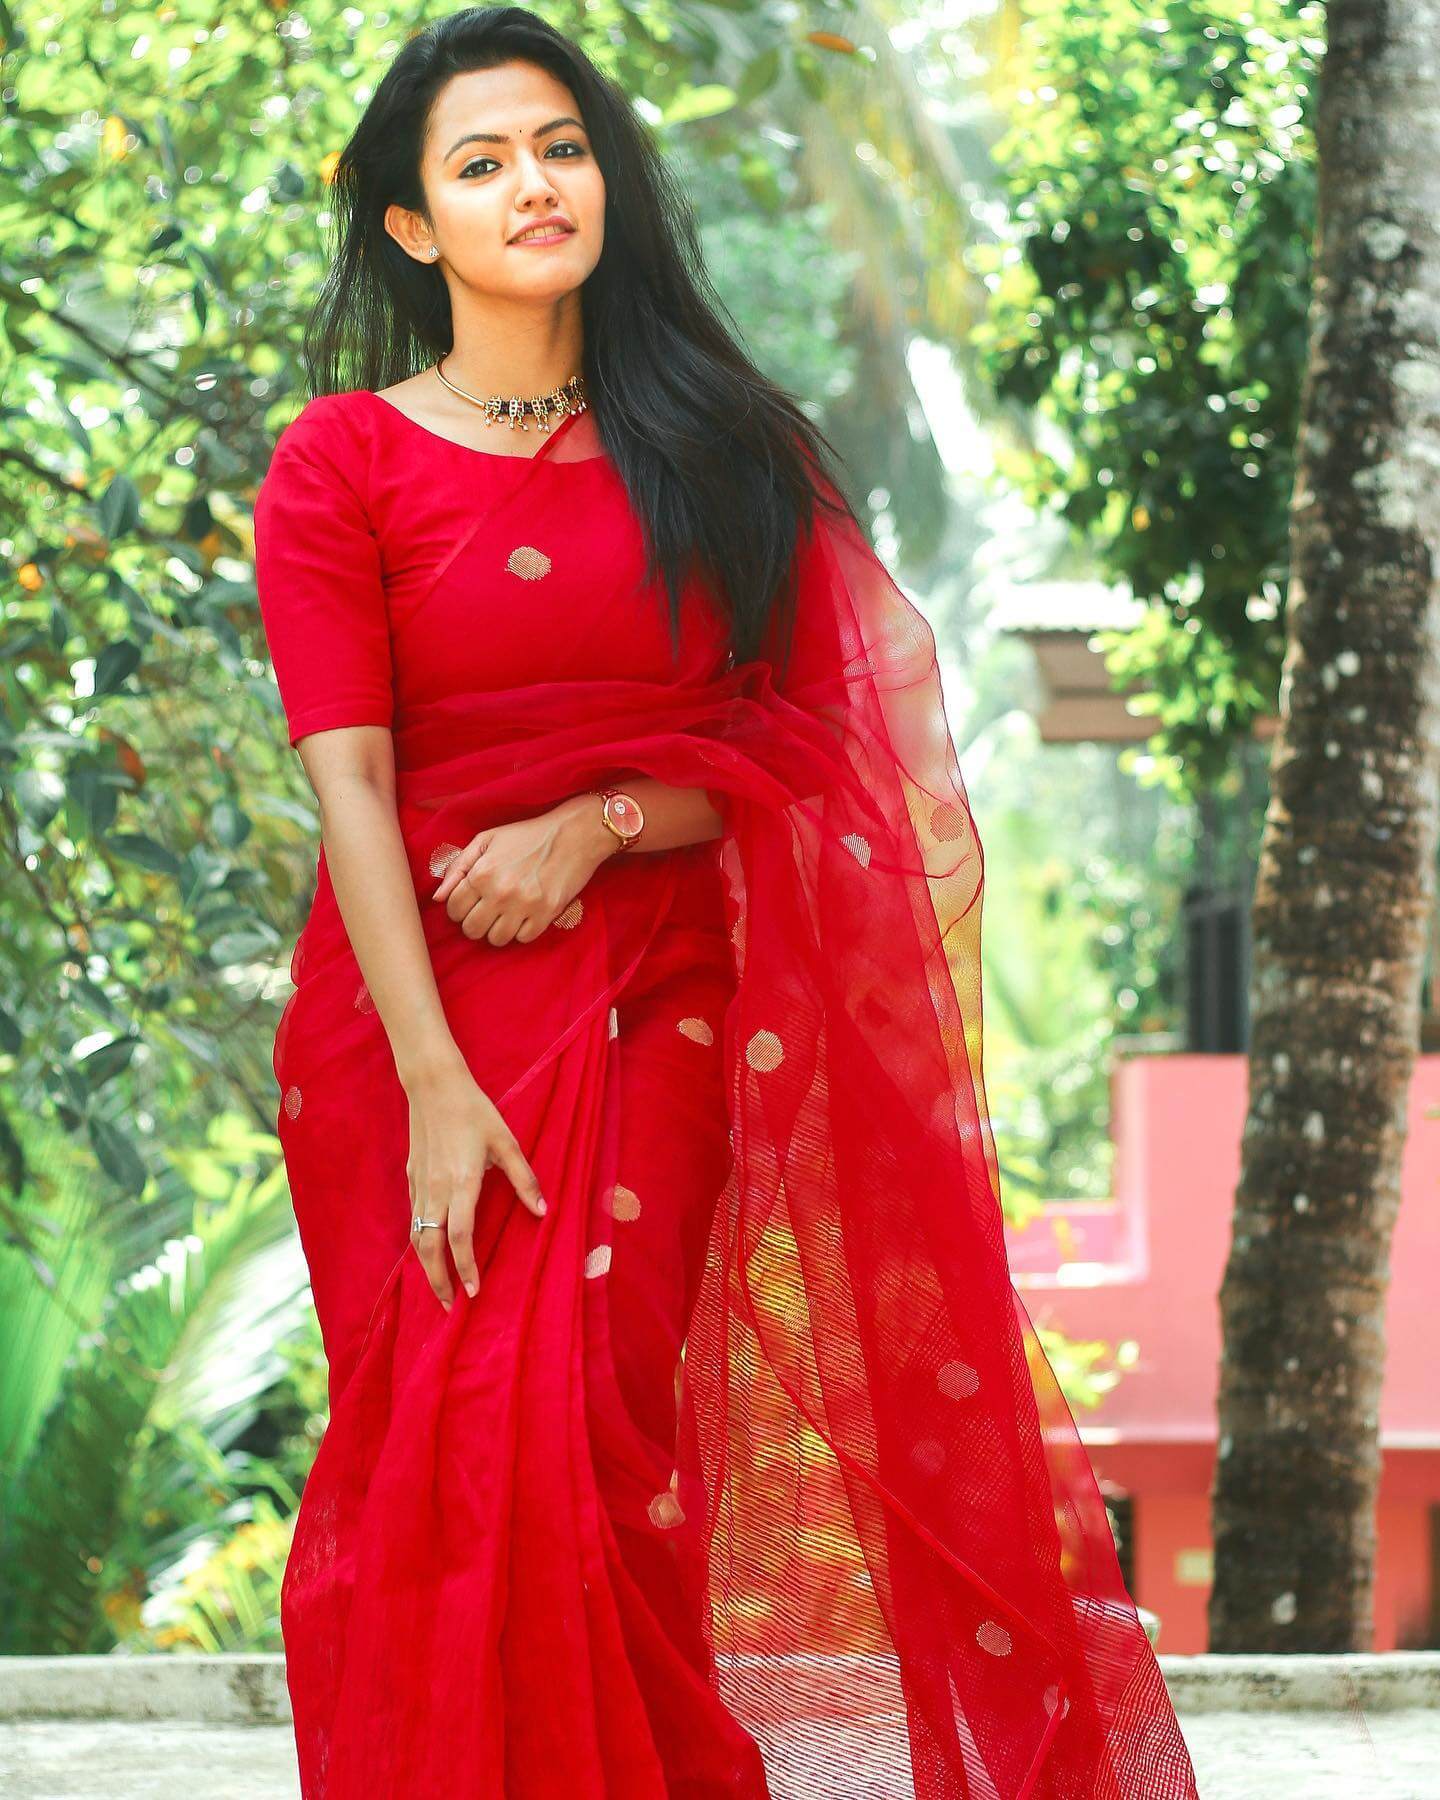 Aparna Das In Red & Golden Polka Dot Saree Look Pretty & Vibrant - Festive Outfits & Looks